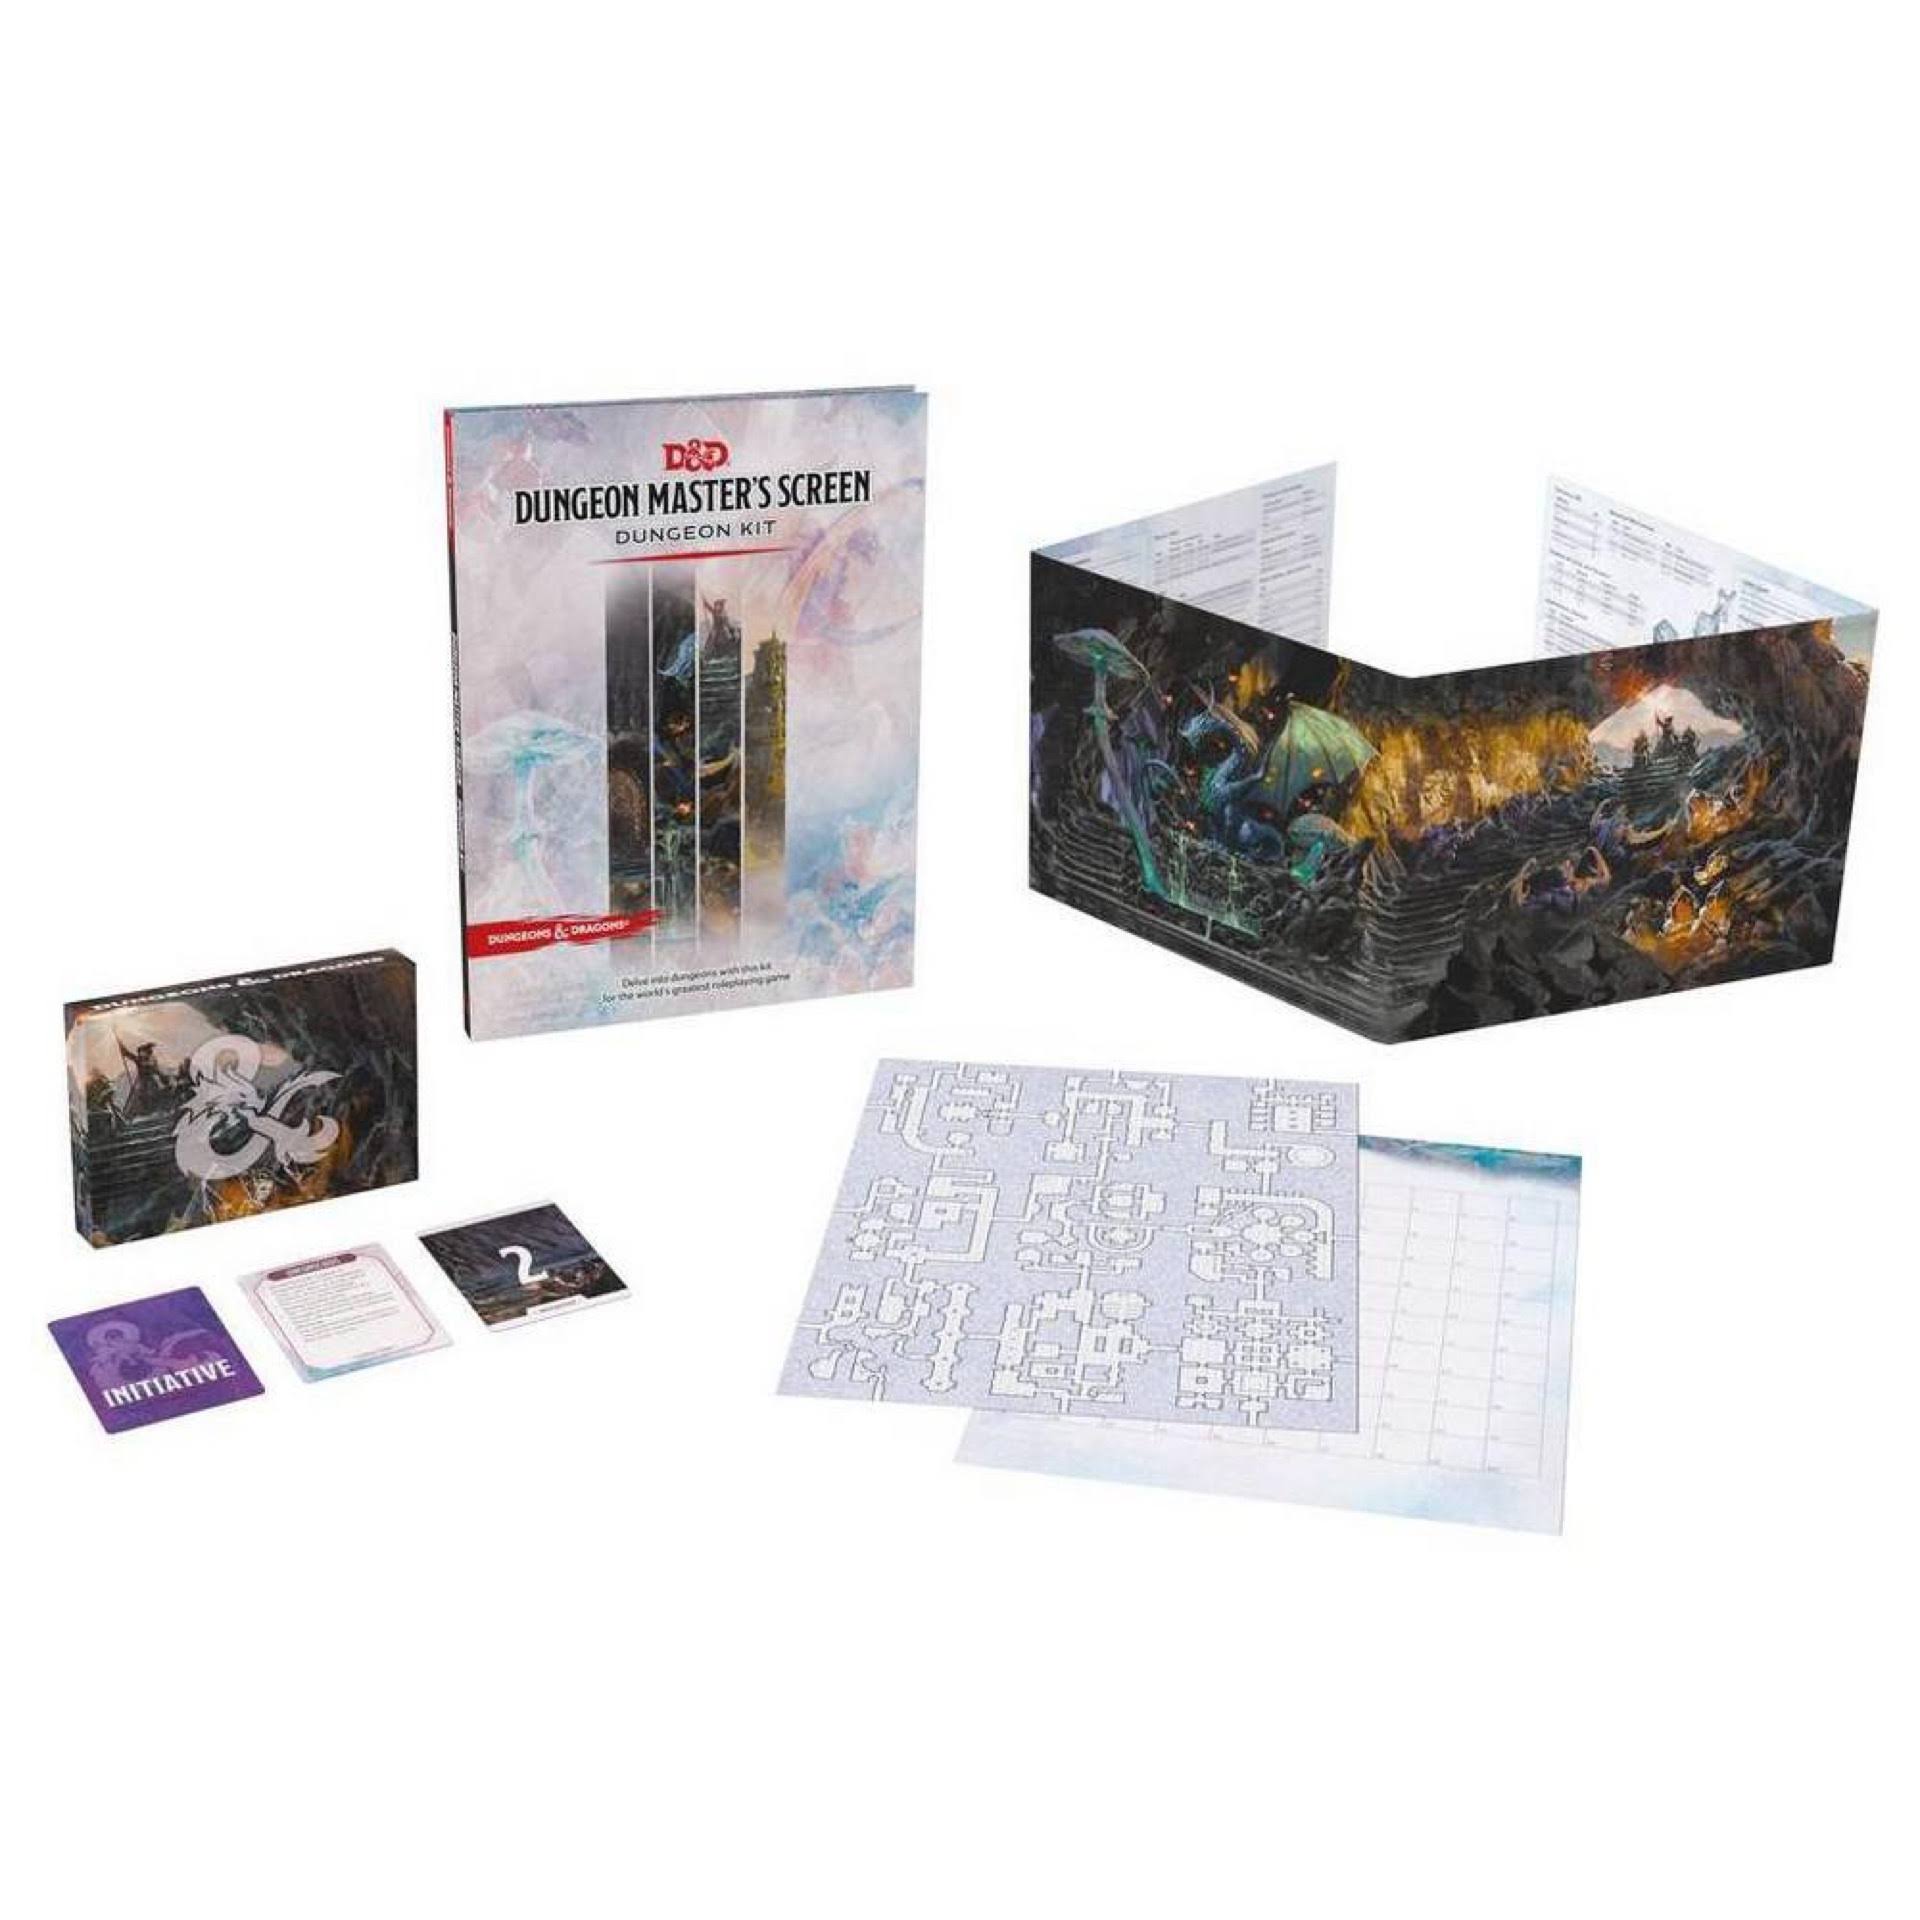 D&D Dungeon Masters Screen: Dungeon Kit (Dungeons & Dragons DM Accessories)